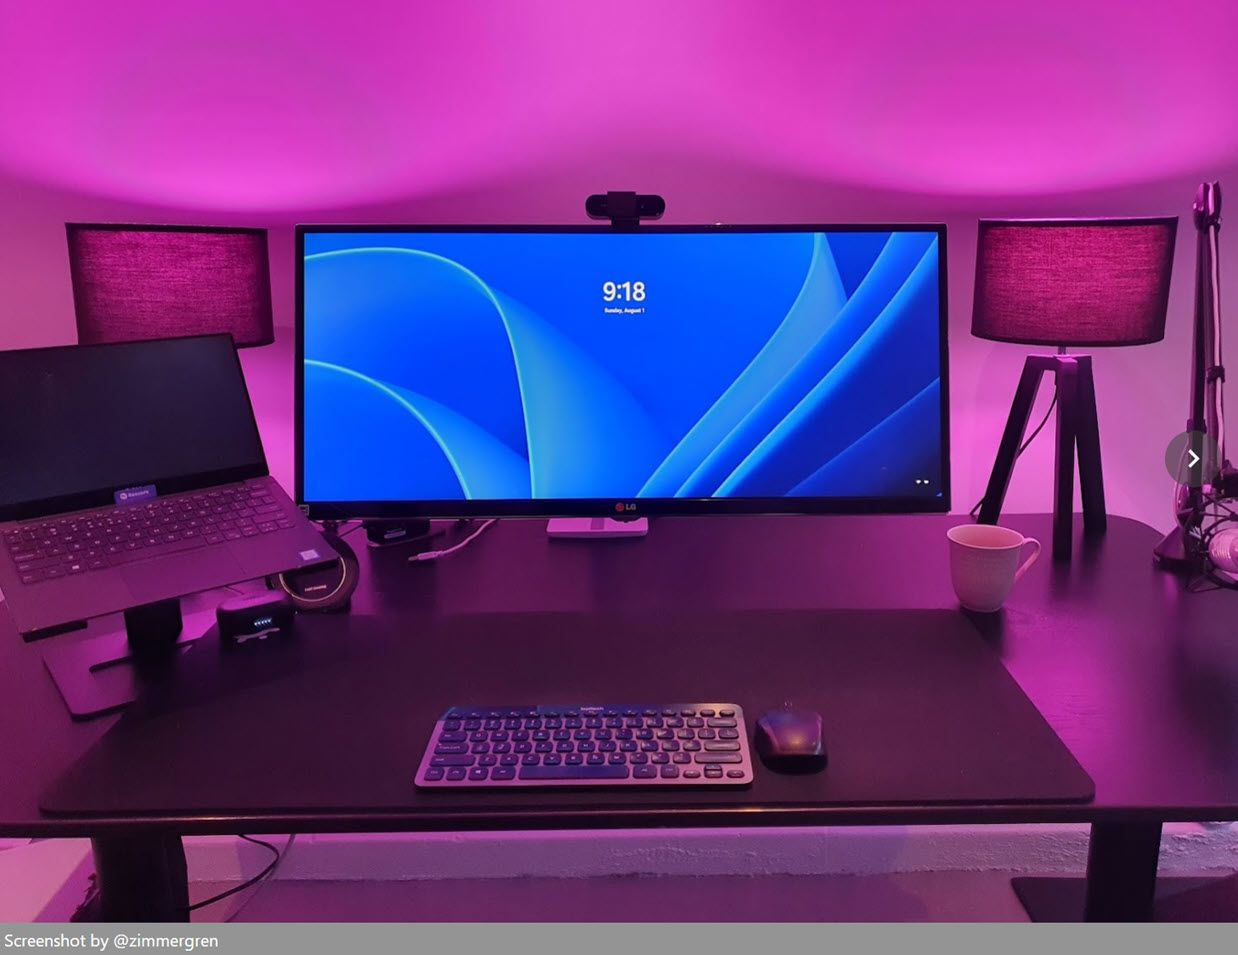 Ultrawide vs. dual monitors: What's best for you?